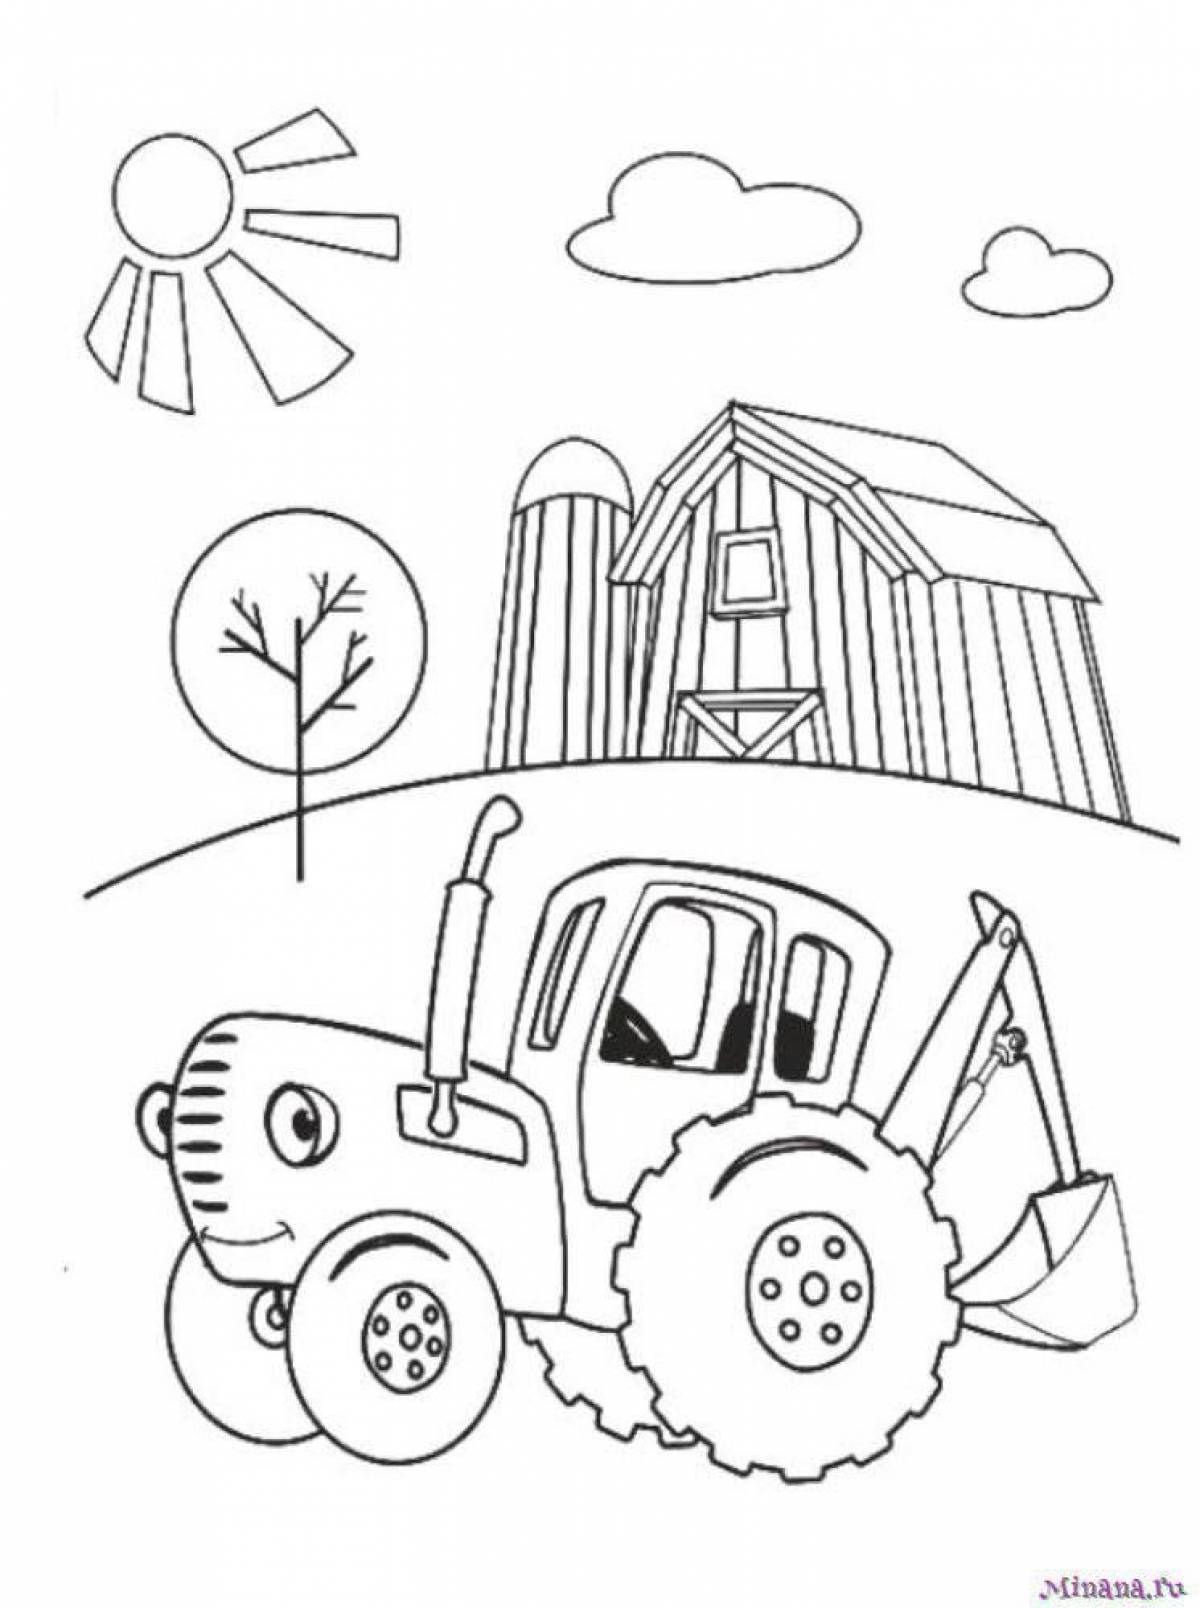 Fabulous blue tractor coloring book for kids